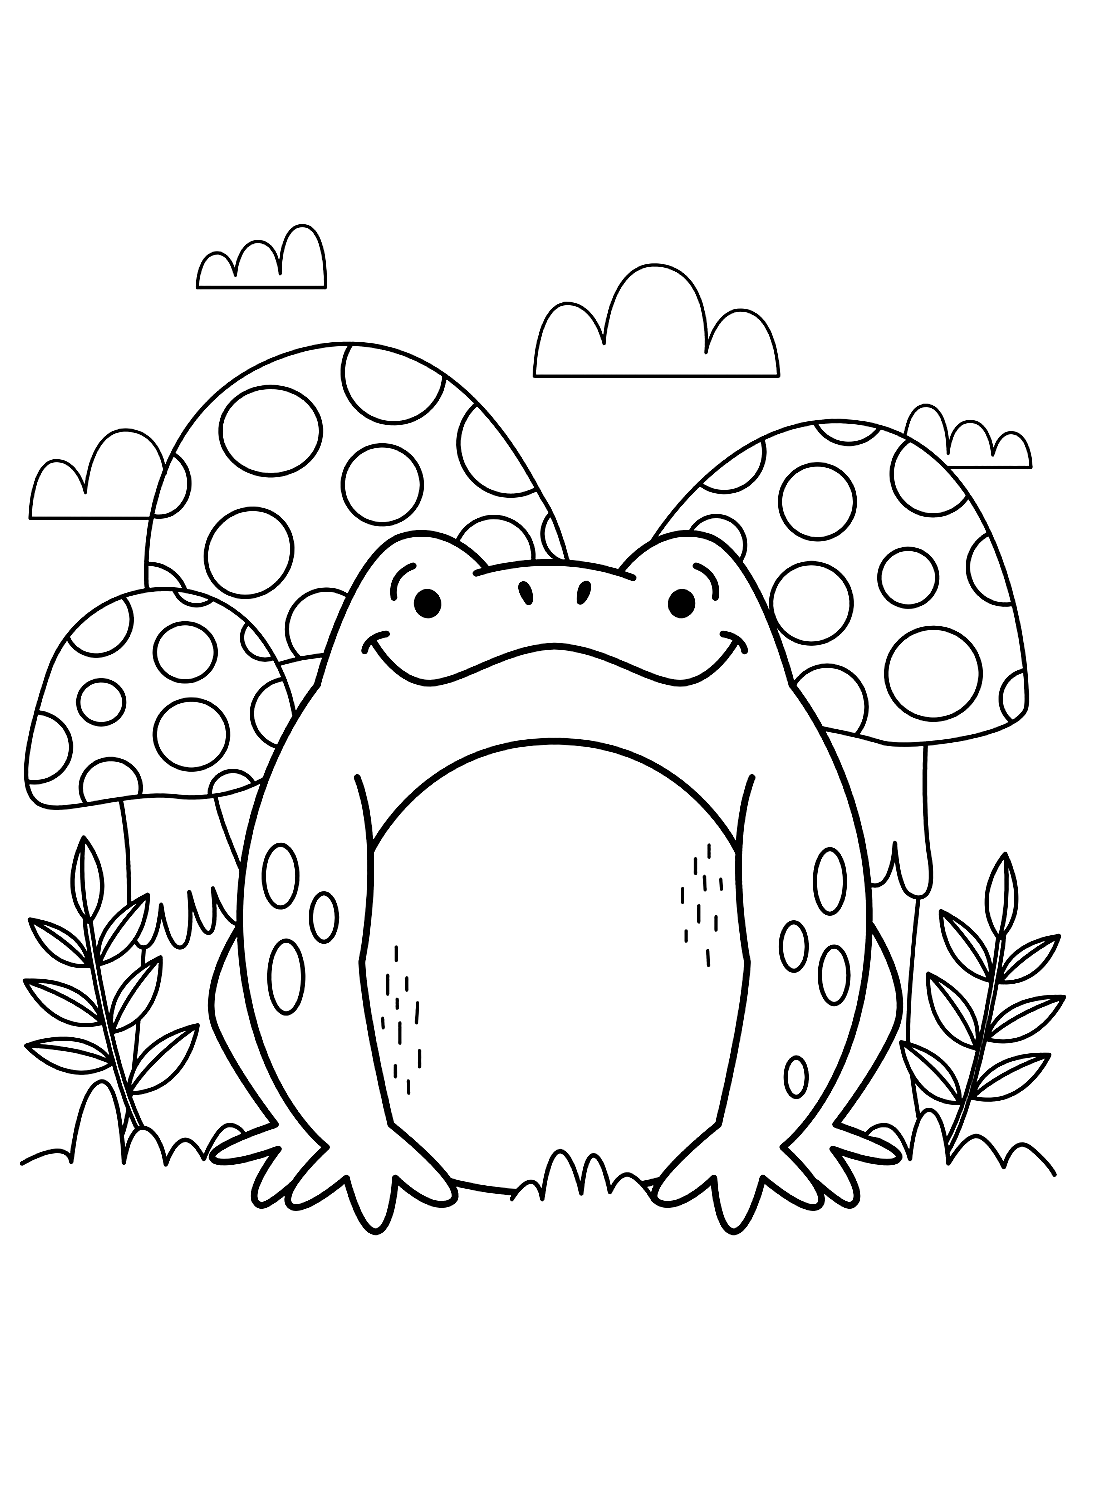 Free printable frog pictures